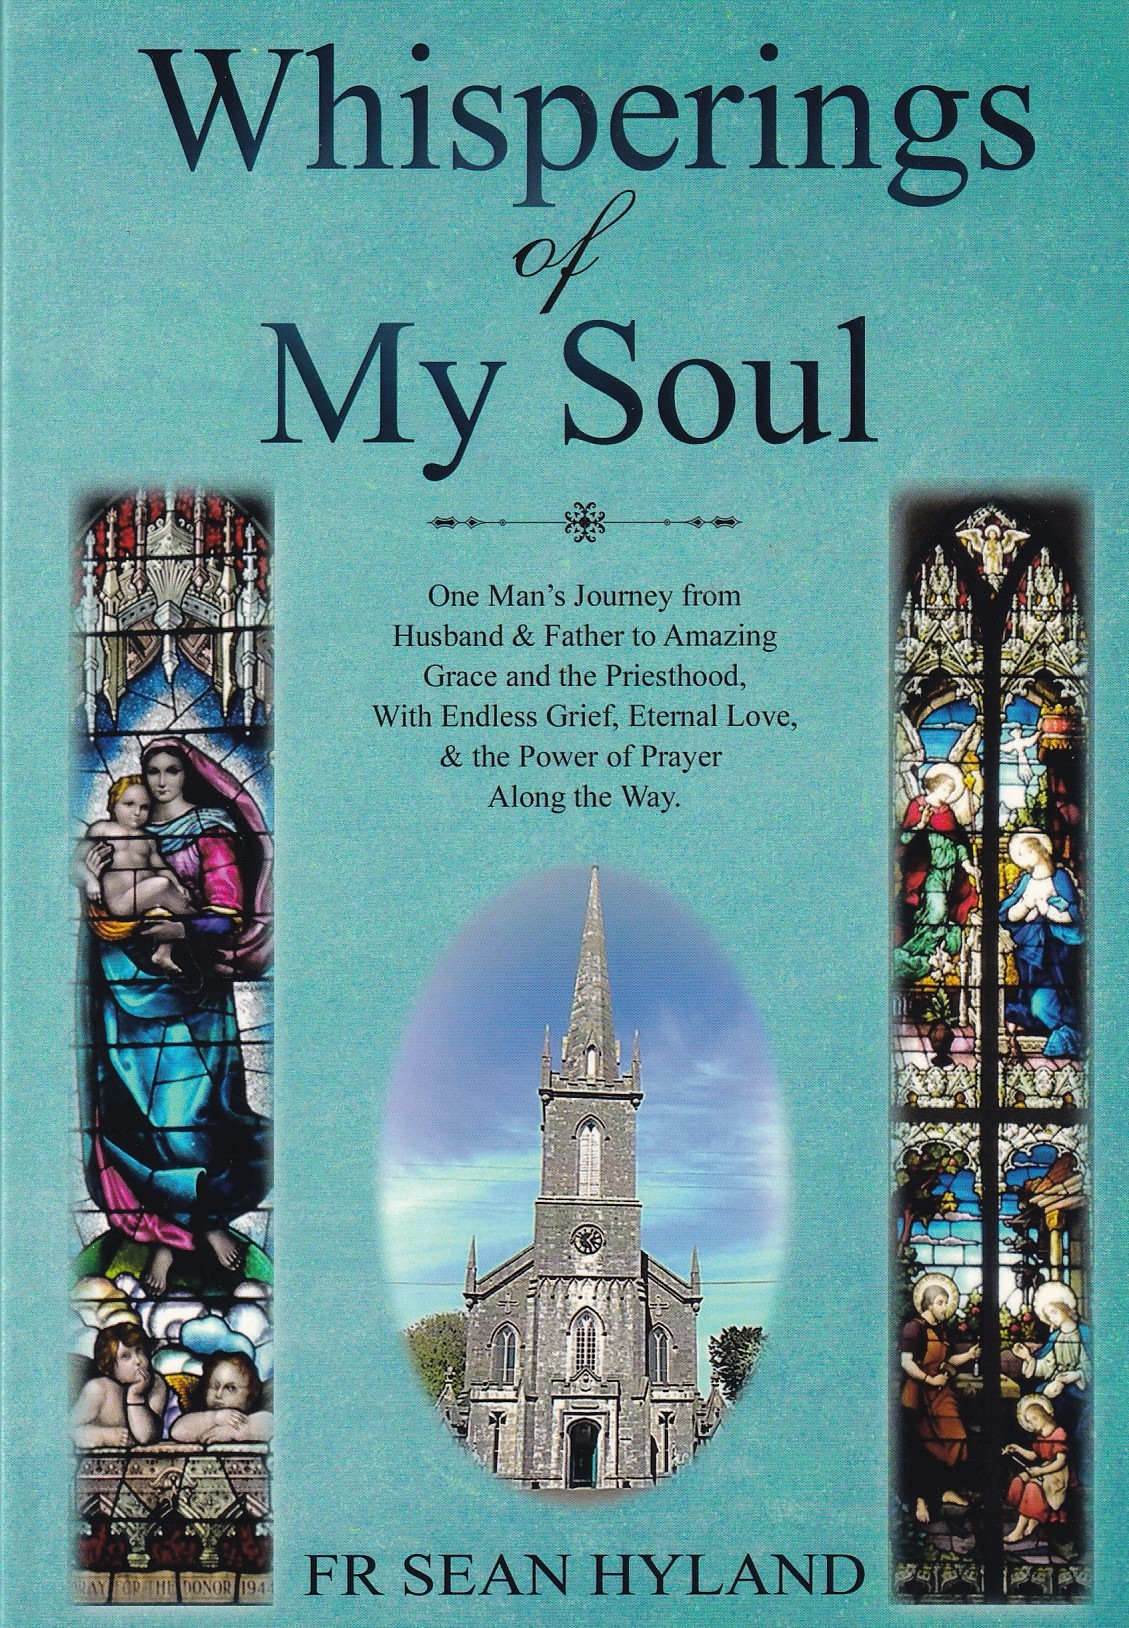 Whisperings of My Soul: One Man’s Journey from Husband and Father to Amazing Grace and the Priesthood, with Endless Grief, Eternal Love, and the Power of Prayer along the Way [Signed] by Fr. Sean Hyland